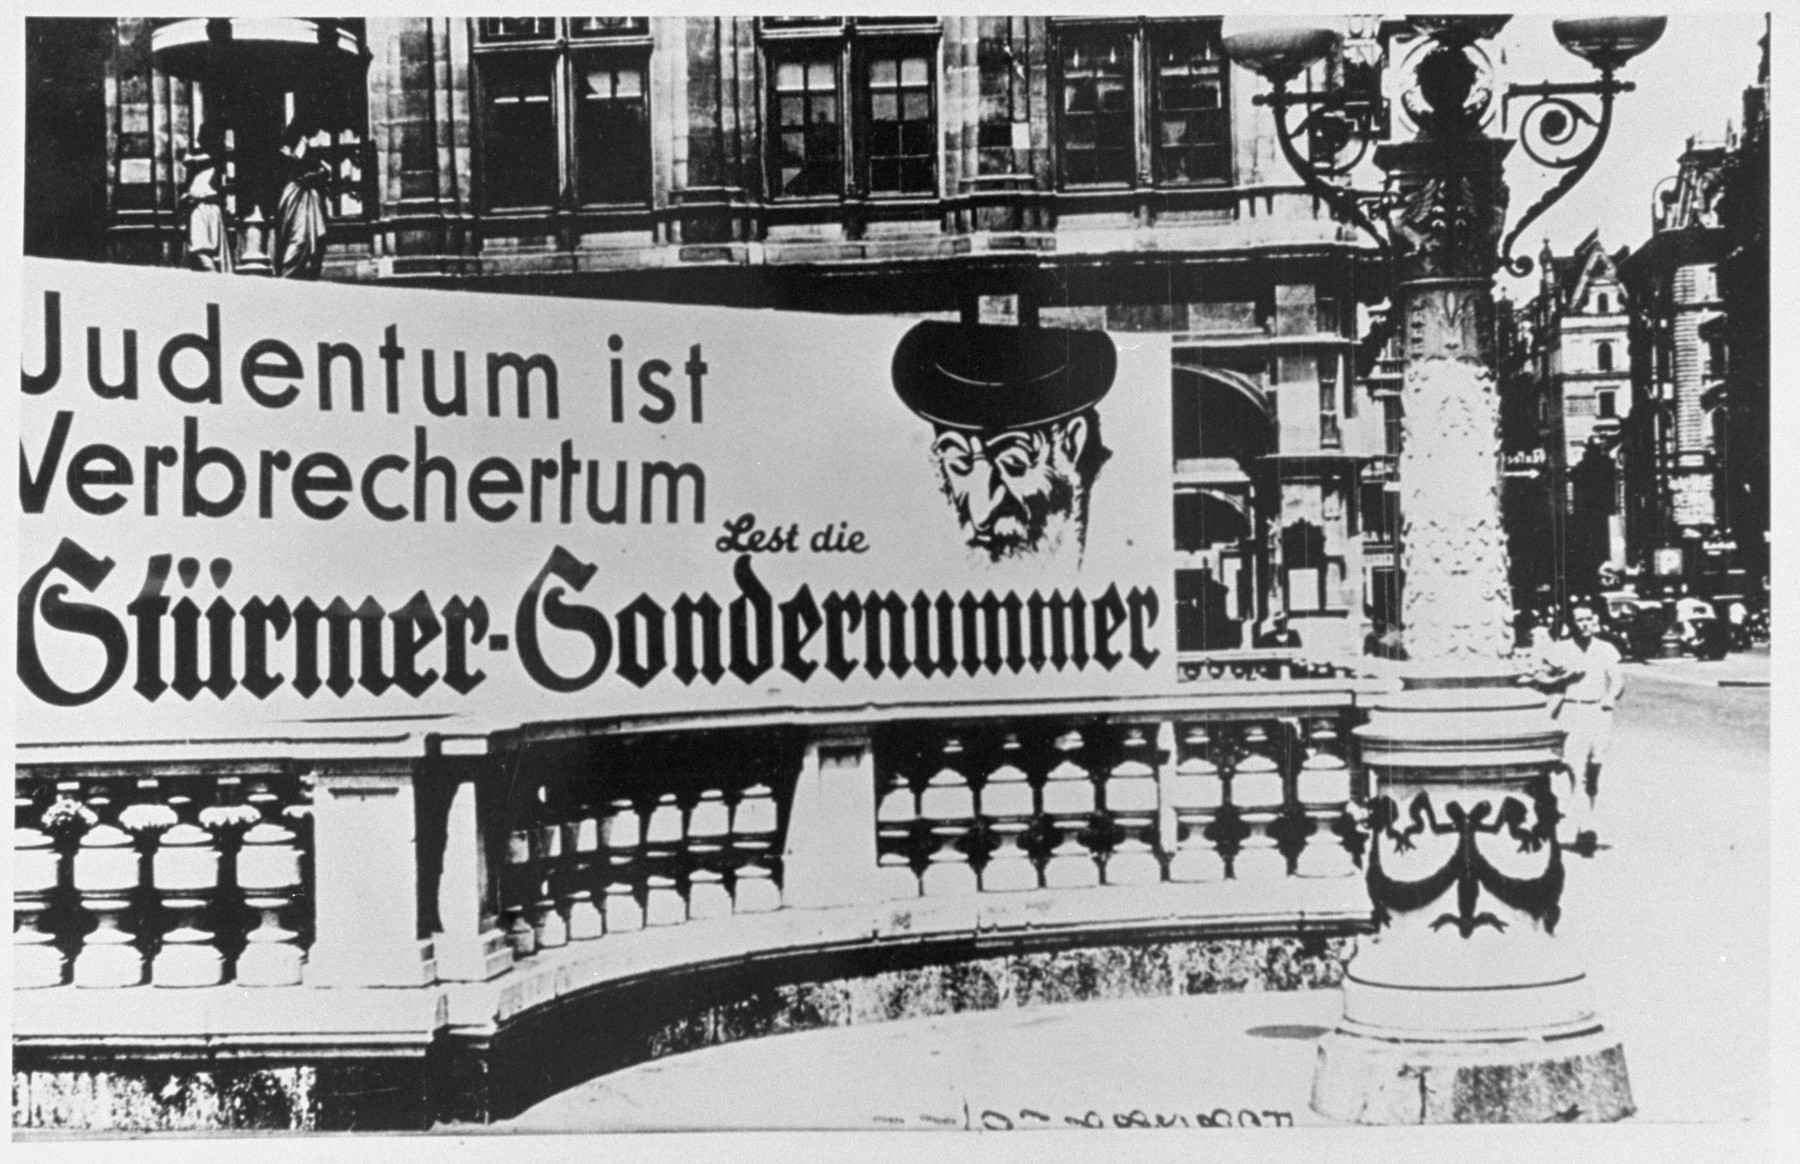 An anti-Semitic "Der Stuermer" advertisement in front of the opera house in Vienna reads: "To be Jewish is to be criminal.  Read the special edition of Der Stuermer."